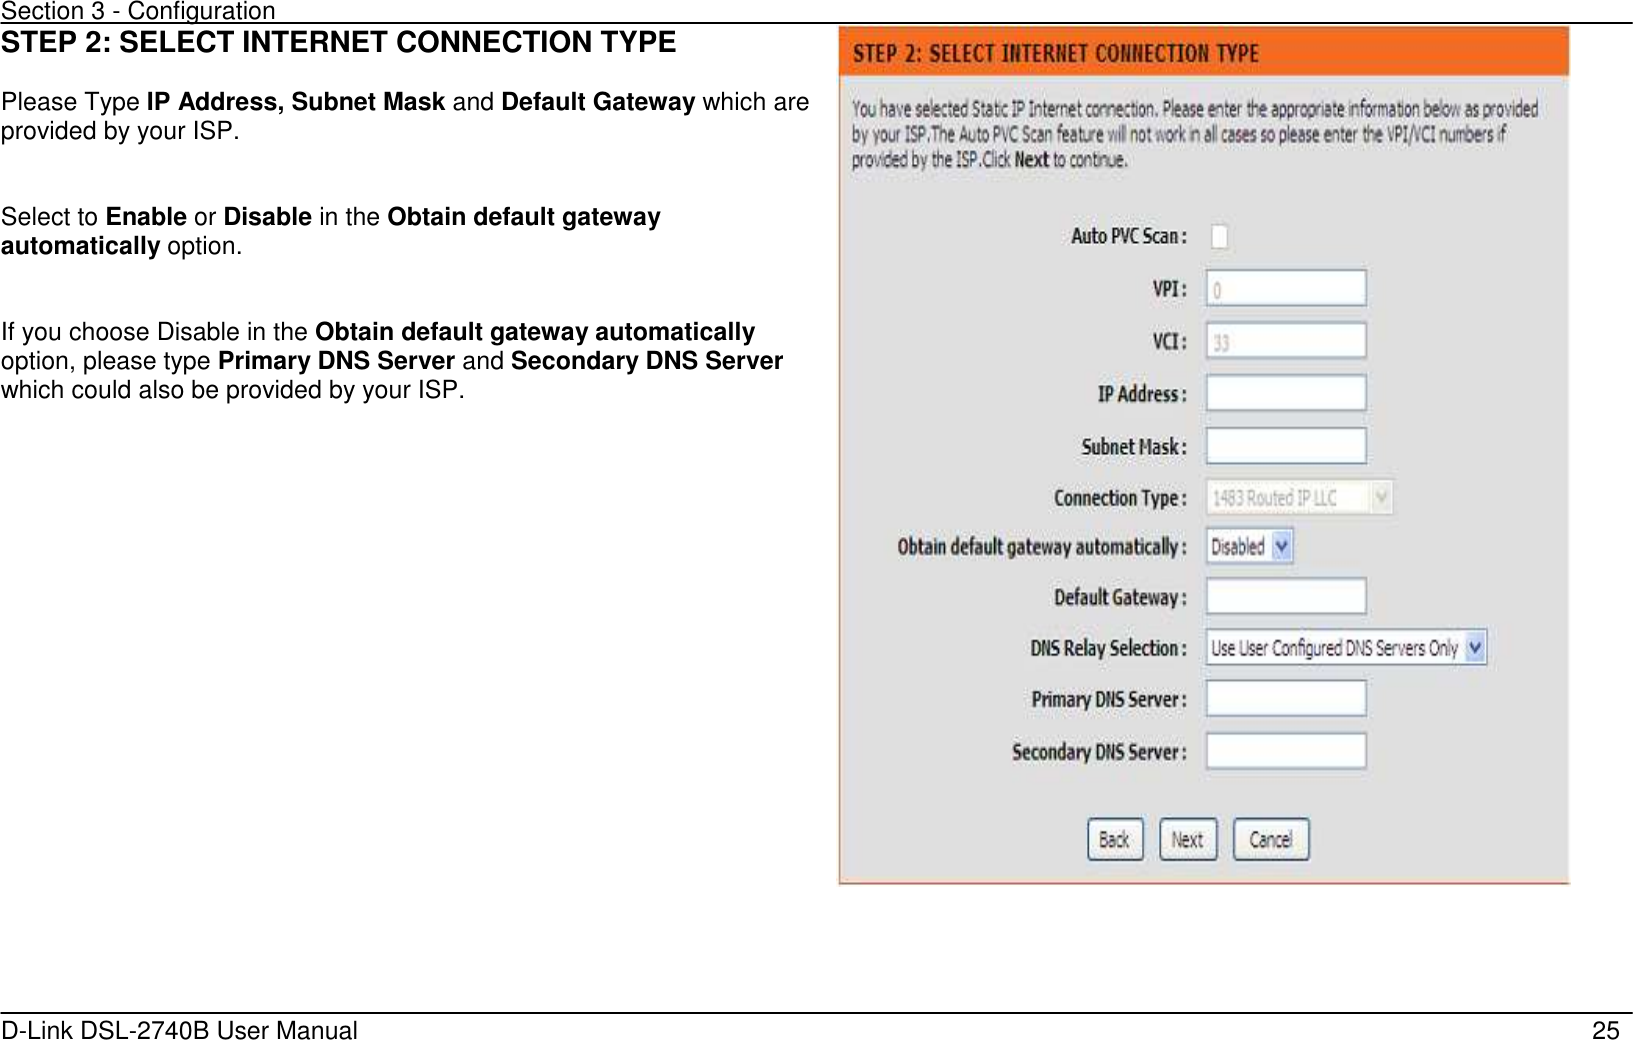 Section 3 - Configuration   D-Link DSL-2740B User Manual                                                  25 STEP 2: SELECT INTERNET CONNECTION TYPE  Please Type IP Address, Subnet Mask and Default Gateway which are provided by your ISP.   Select to Enable or Disable in the Obtain default gateway automatically option.   If you choose Disable in the Obtain default gateway automatically option, please type Primary DNS Server and Secondary DNS Server which could also be provided by your ISP.   